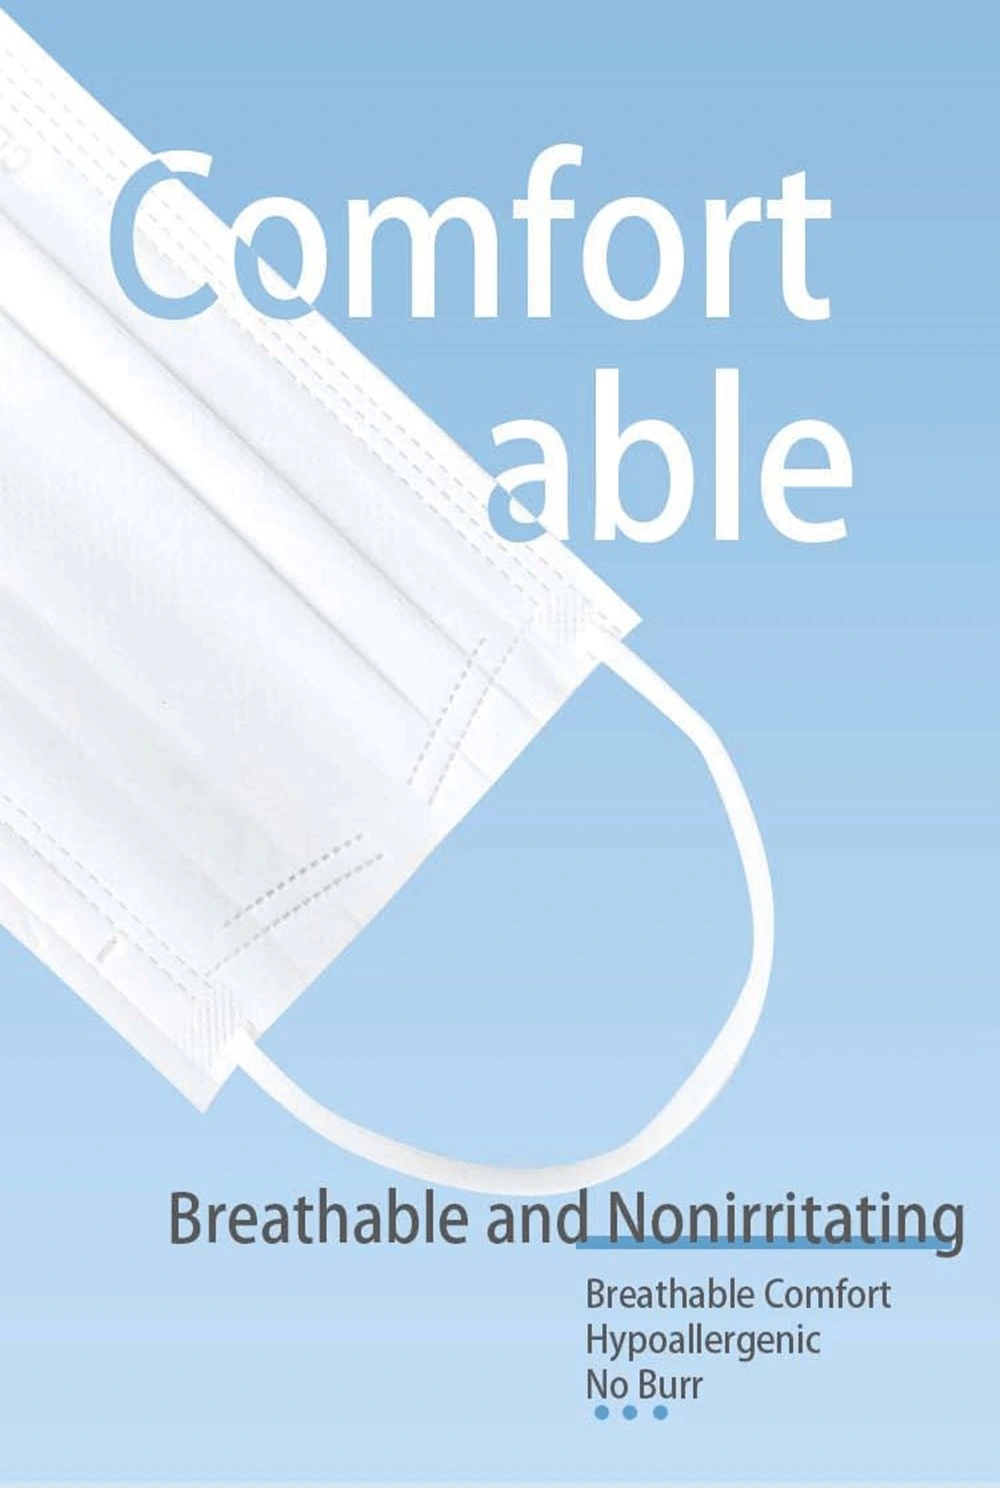 CE Certified Disposable Surgical Mask Class I, II, IIR with BFE 99% Clean & Safe